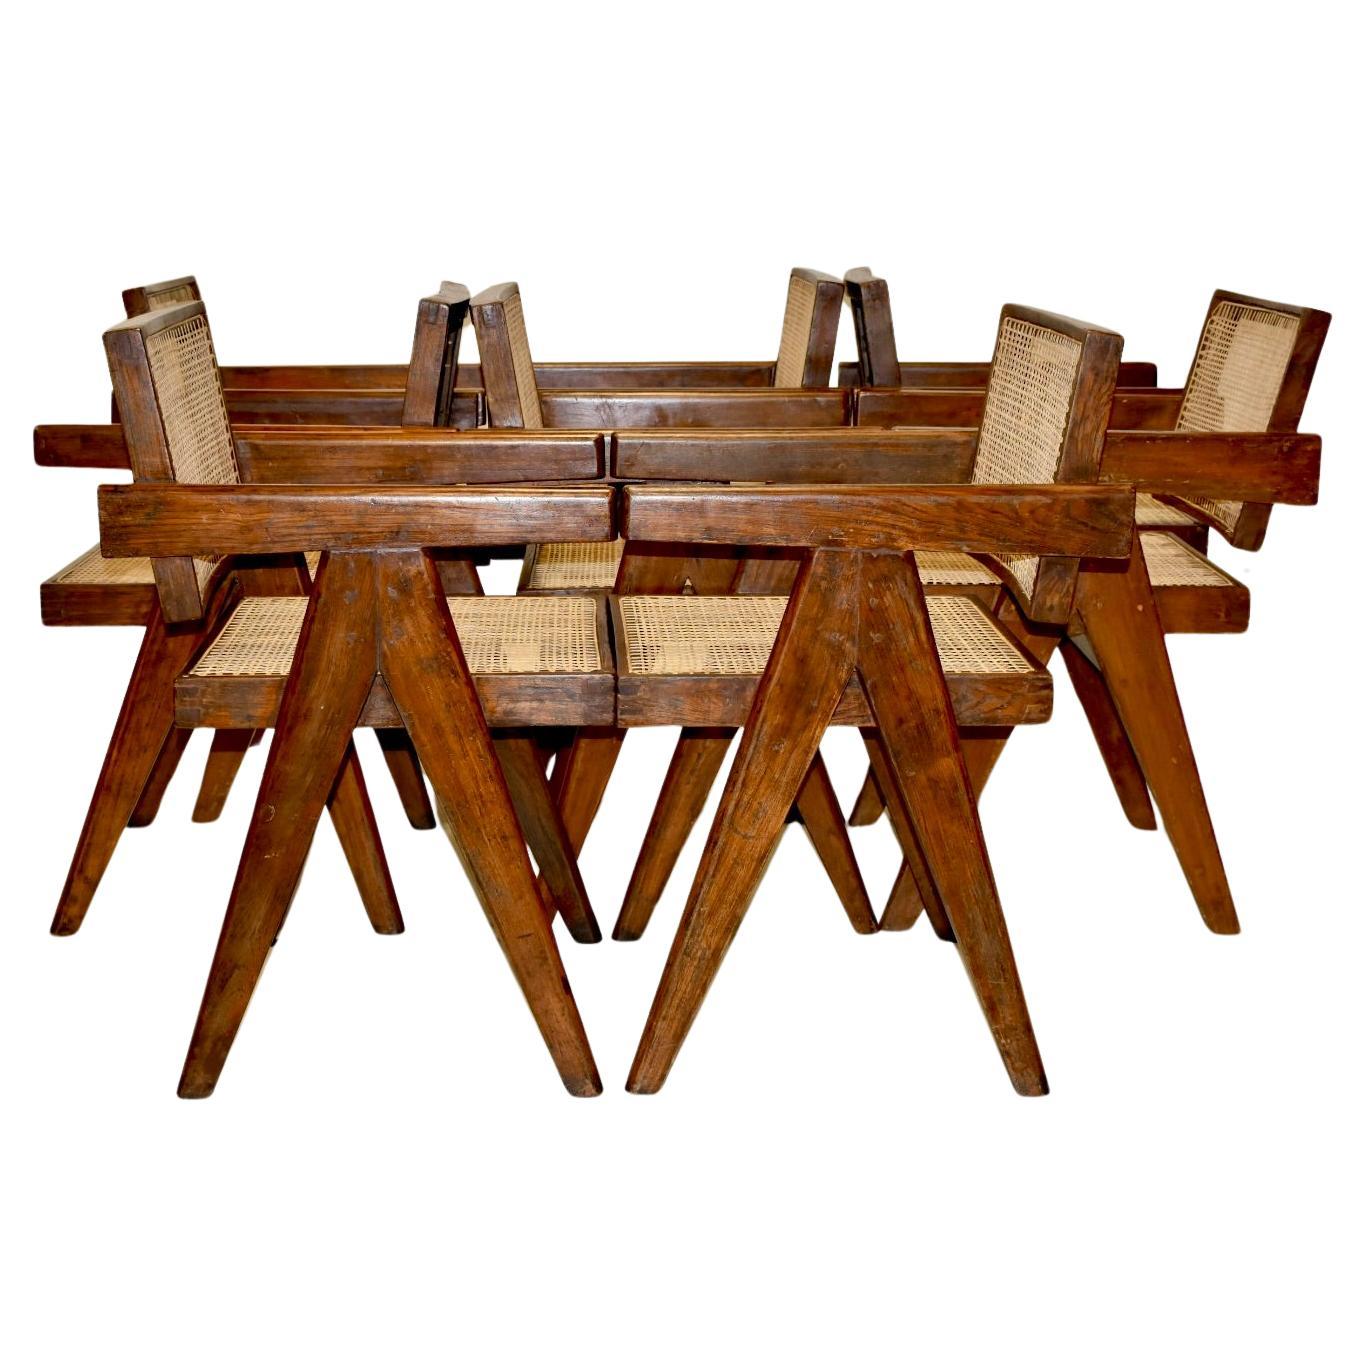 A beautiful set of 8 Pierre Jeanneret floating back office chairs in solid teak.  All chairs are in good vintage condition. 
The braided canework has been replaced.
These iconic pieces were part of the administrative buildings in Chandigarh.
The